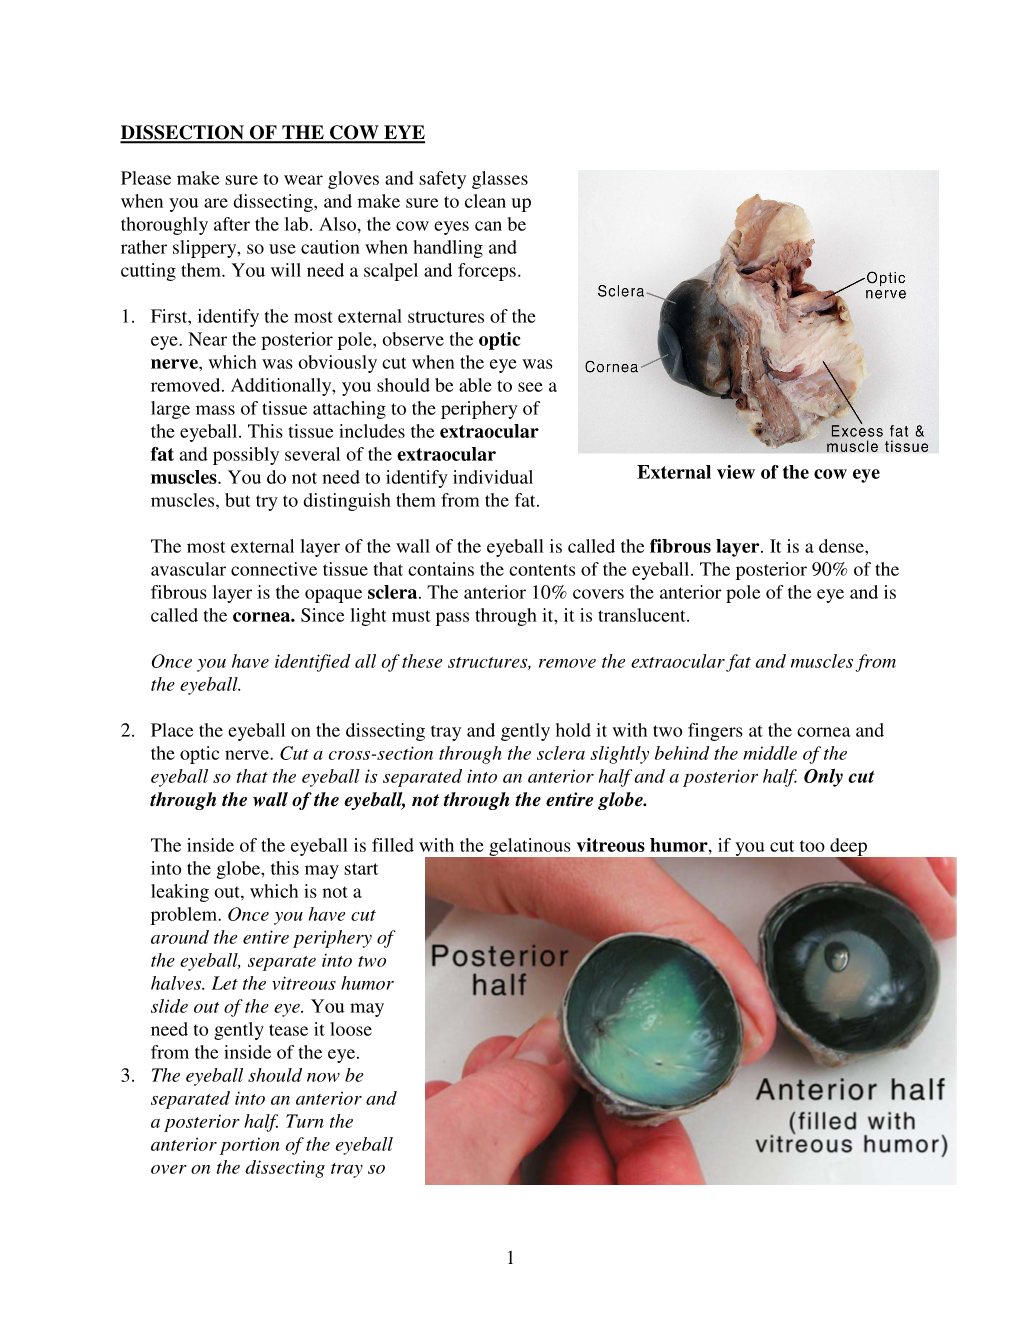 Cow Eye Dissection Guide